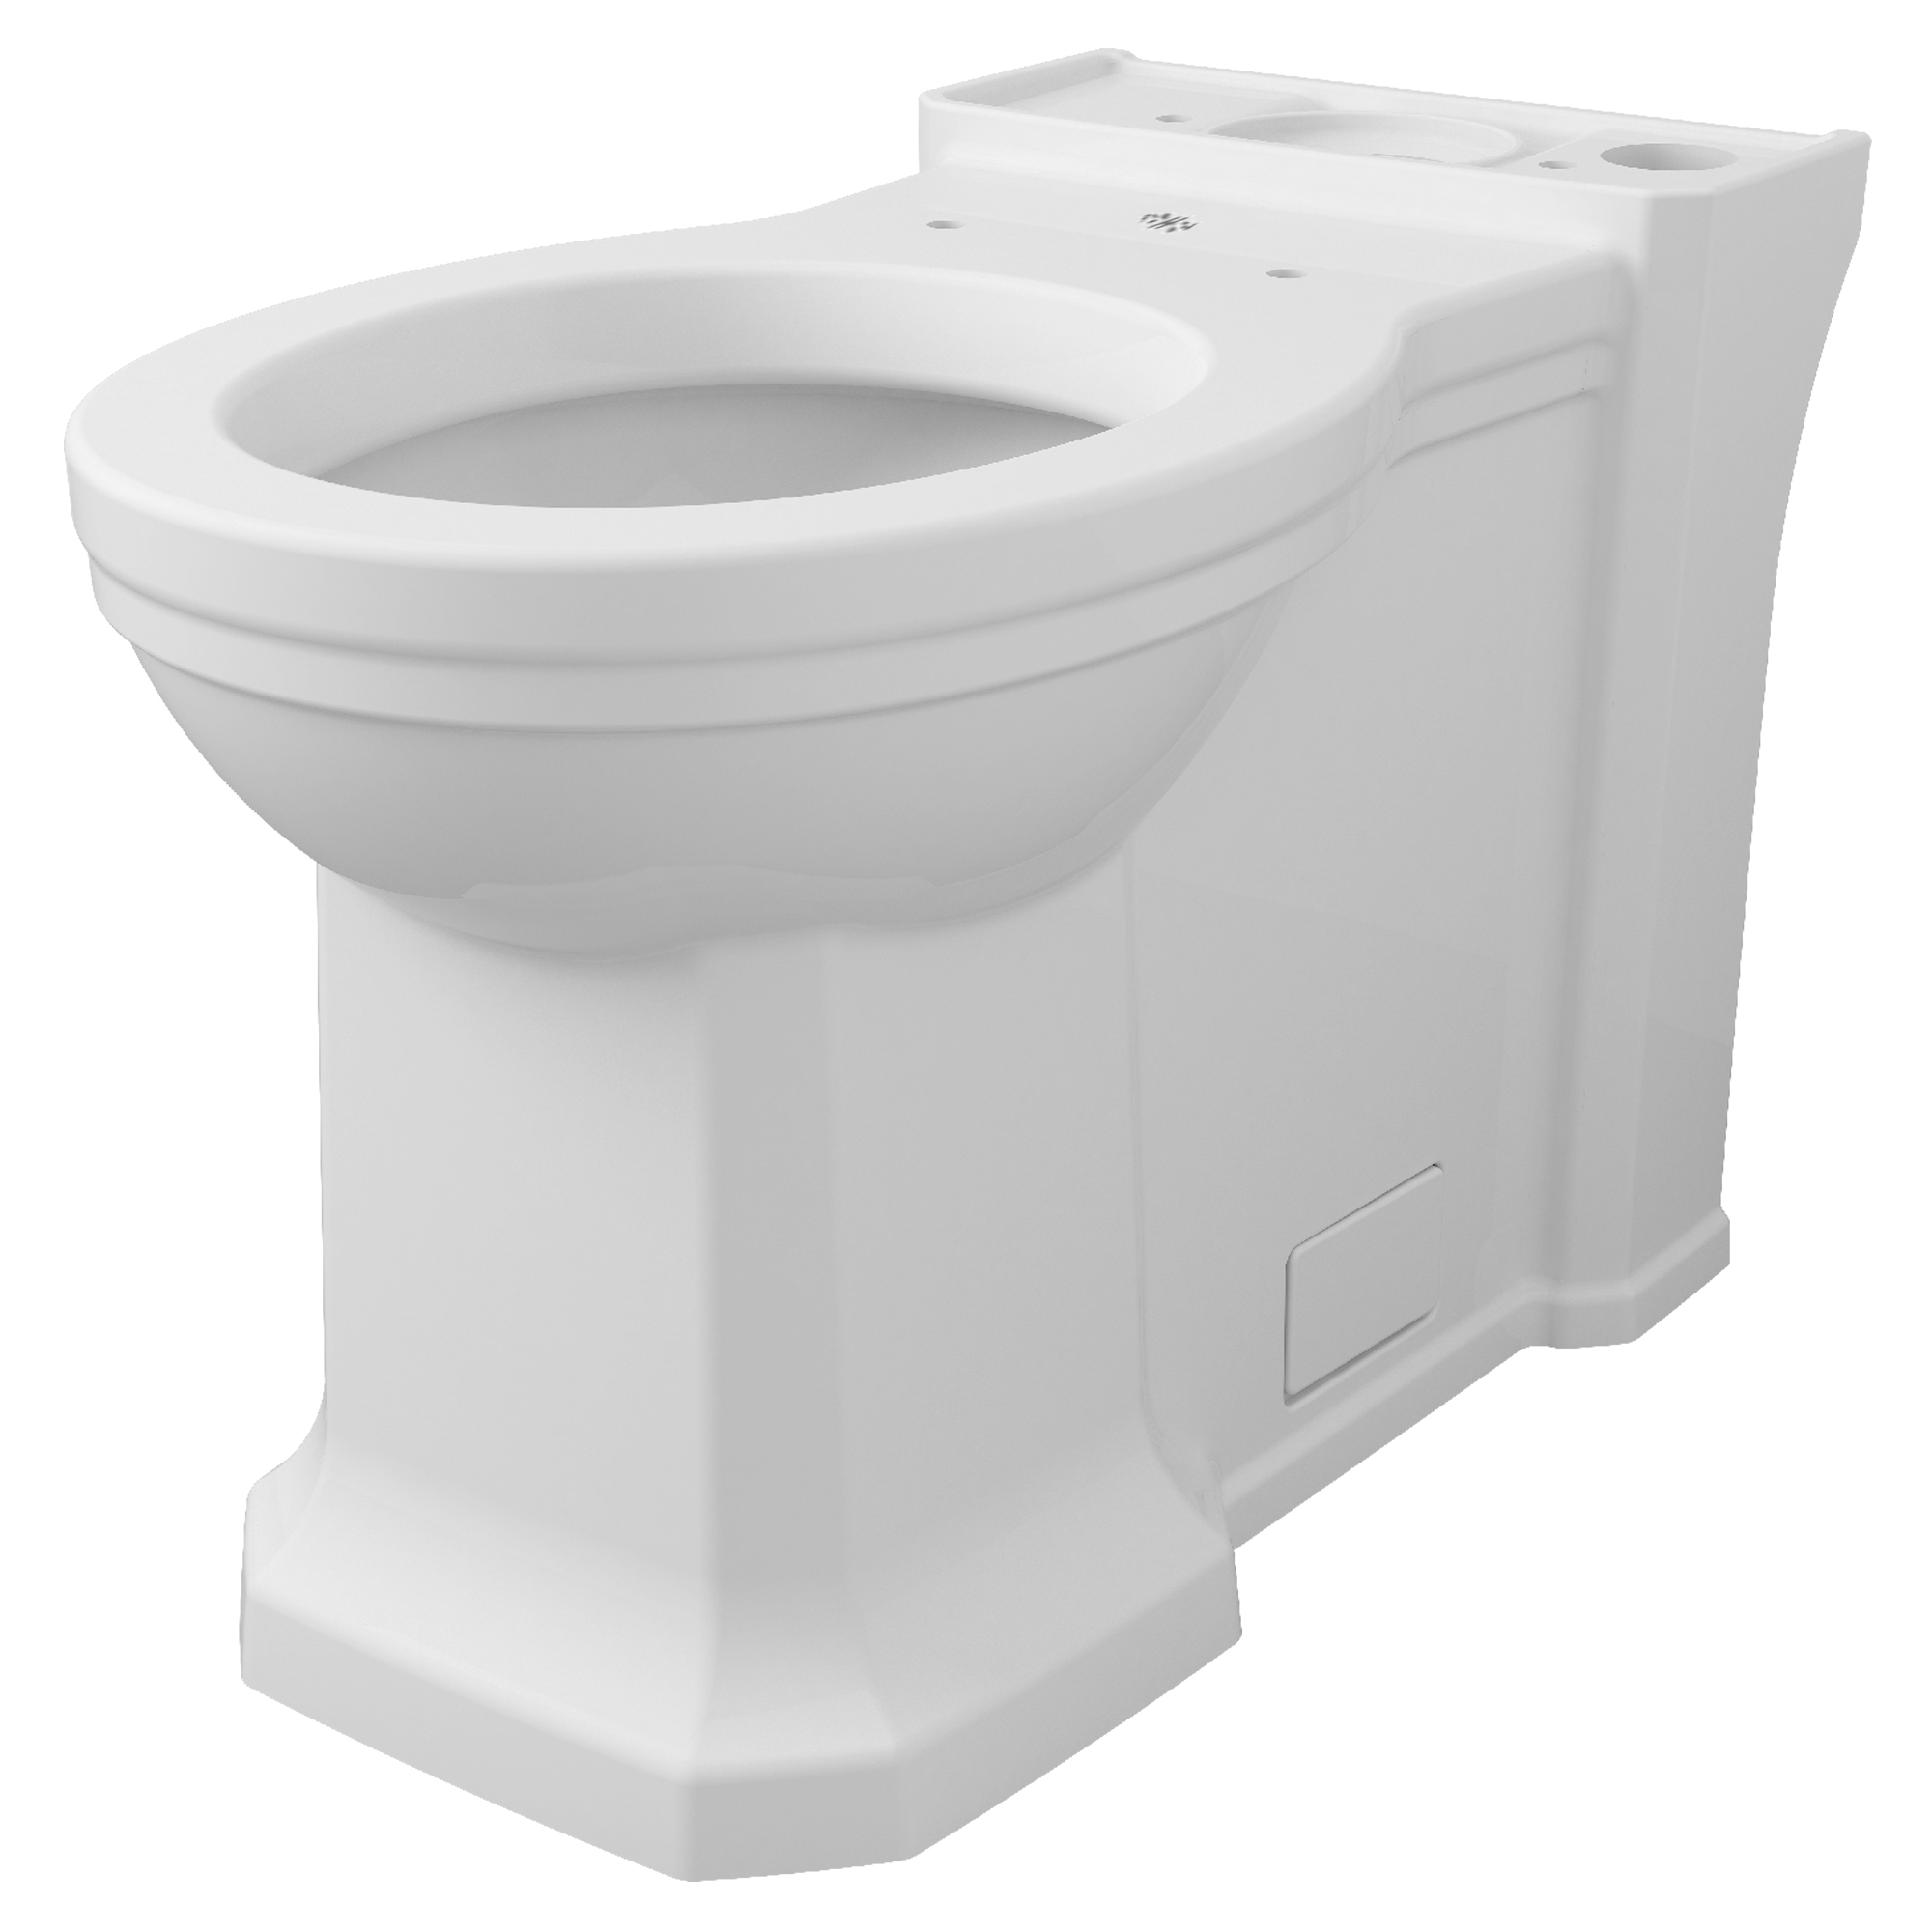 Fitzgerald® Chair Height Elongated Toilet Bowl with Seat